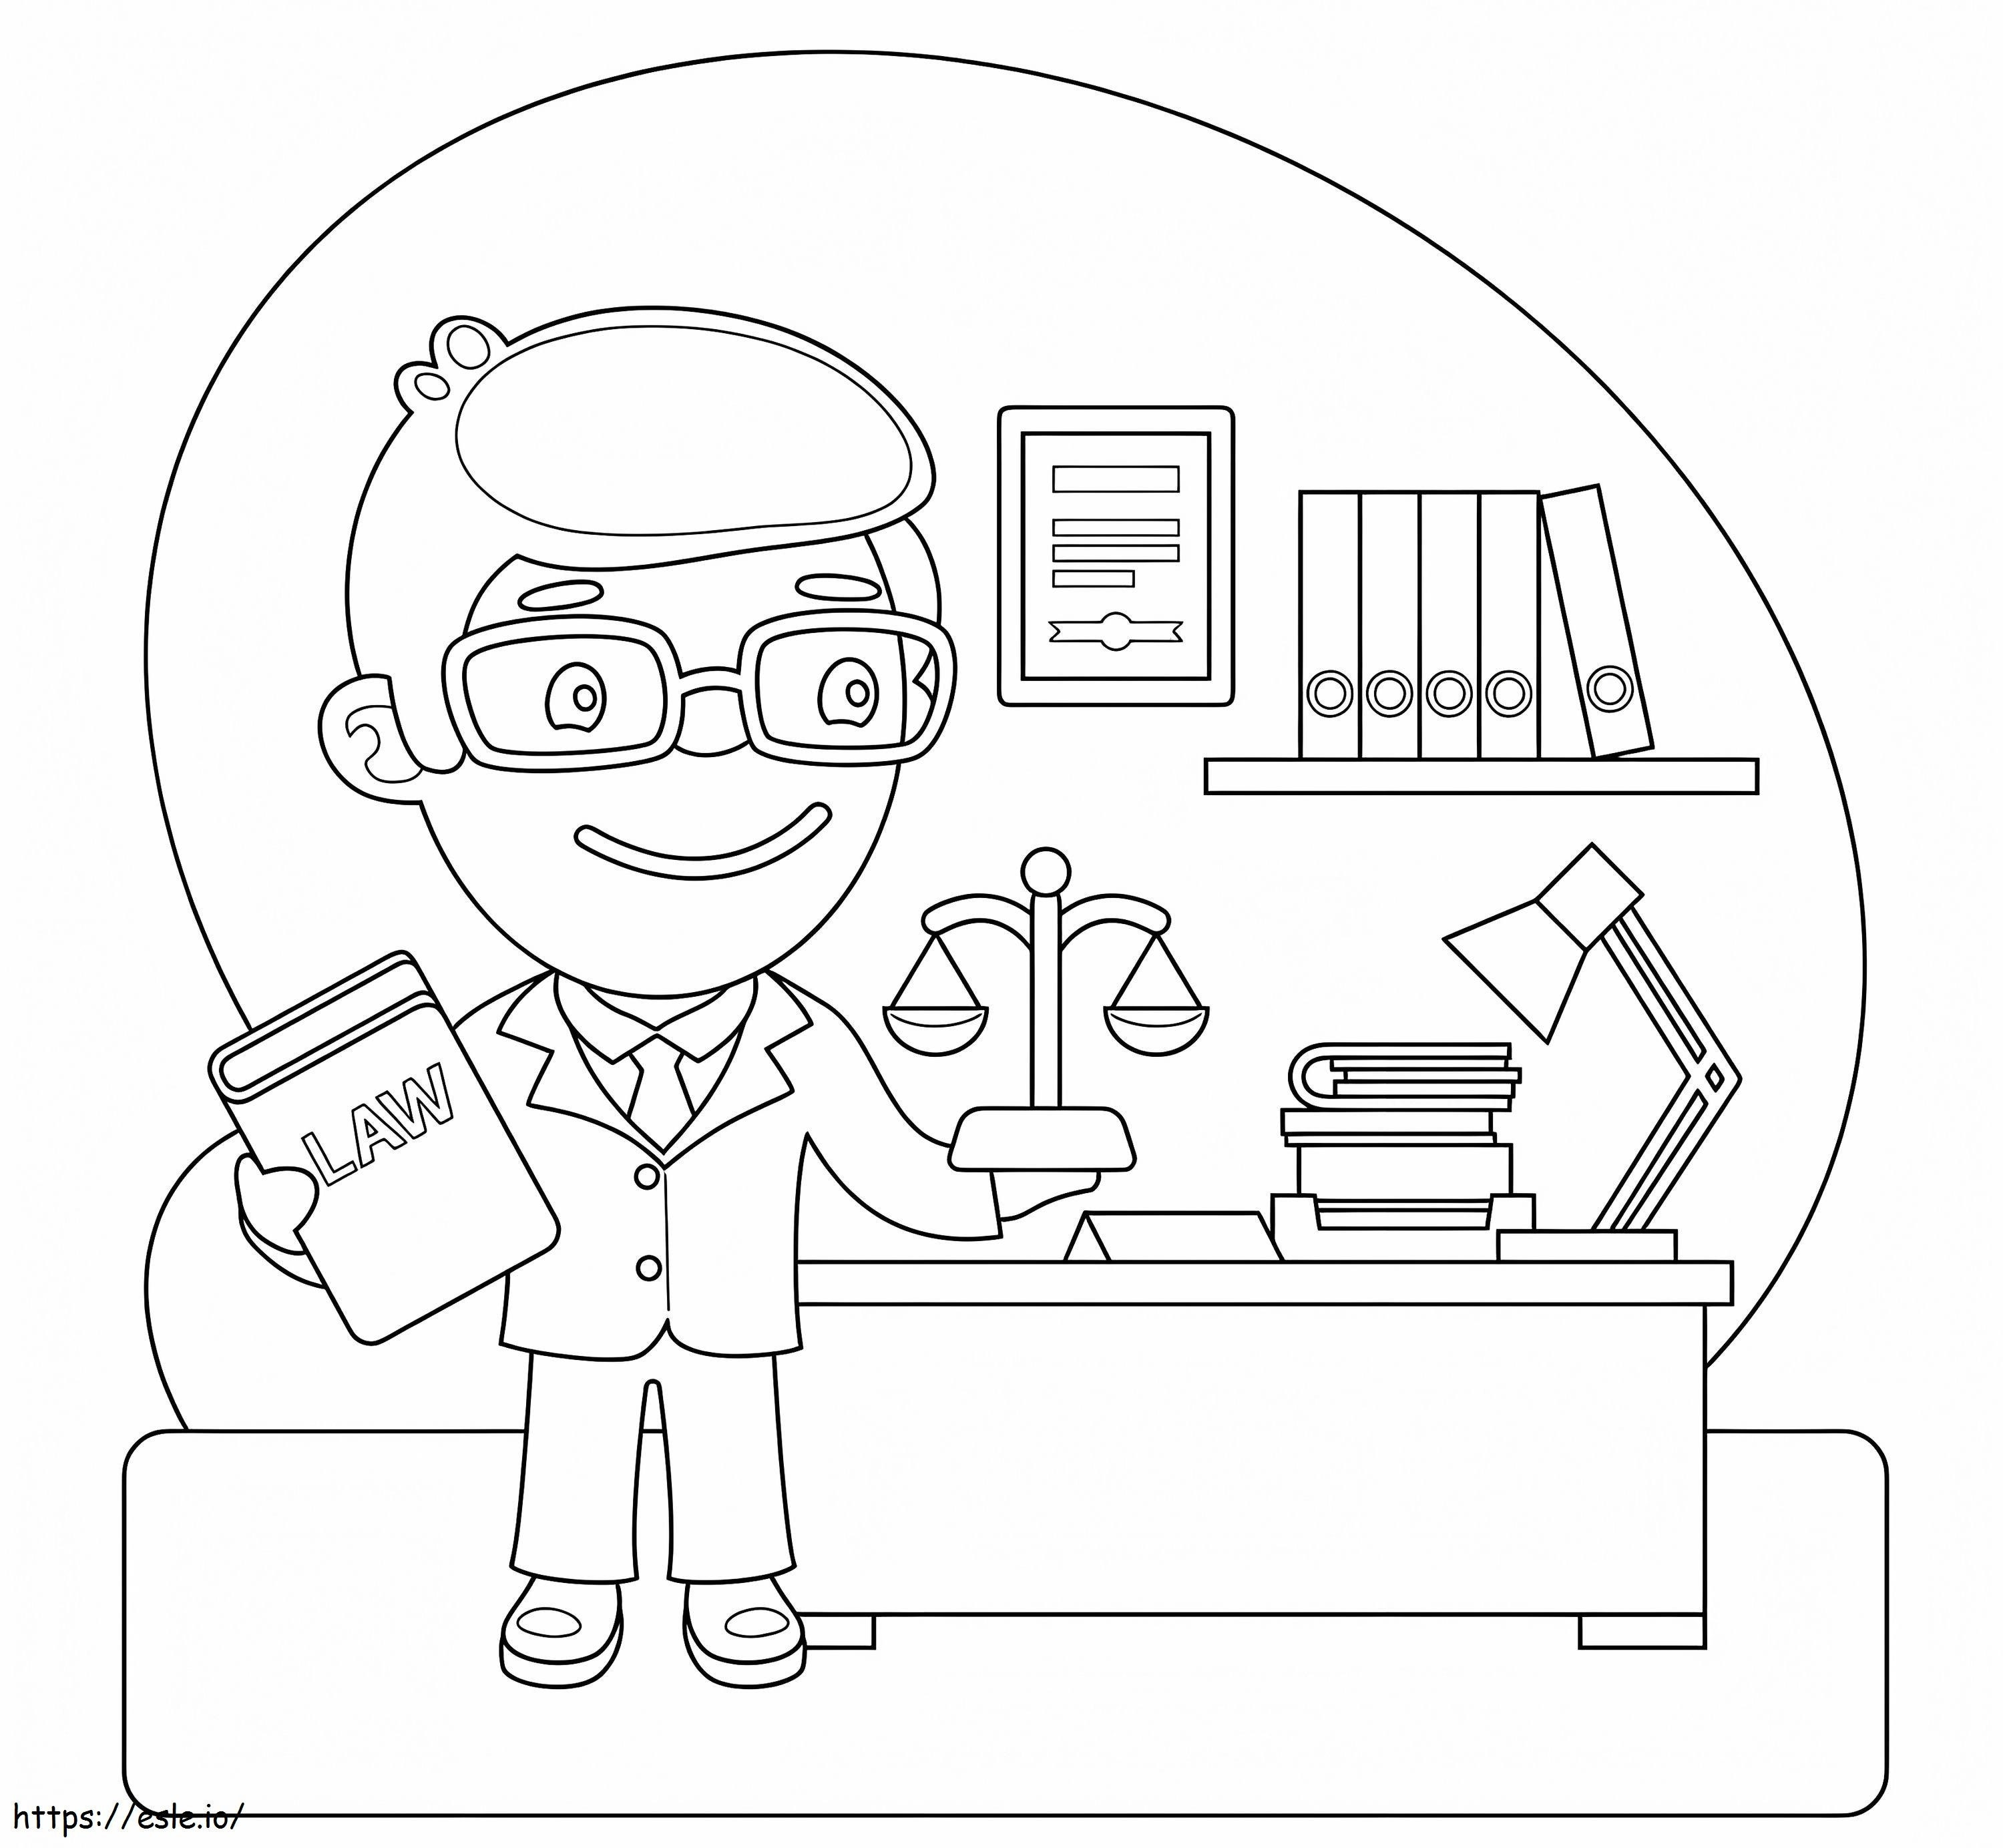 Cute Judge coloring page